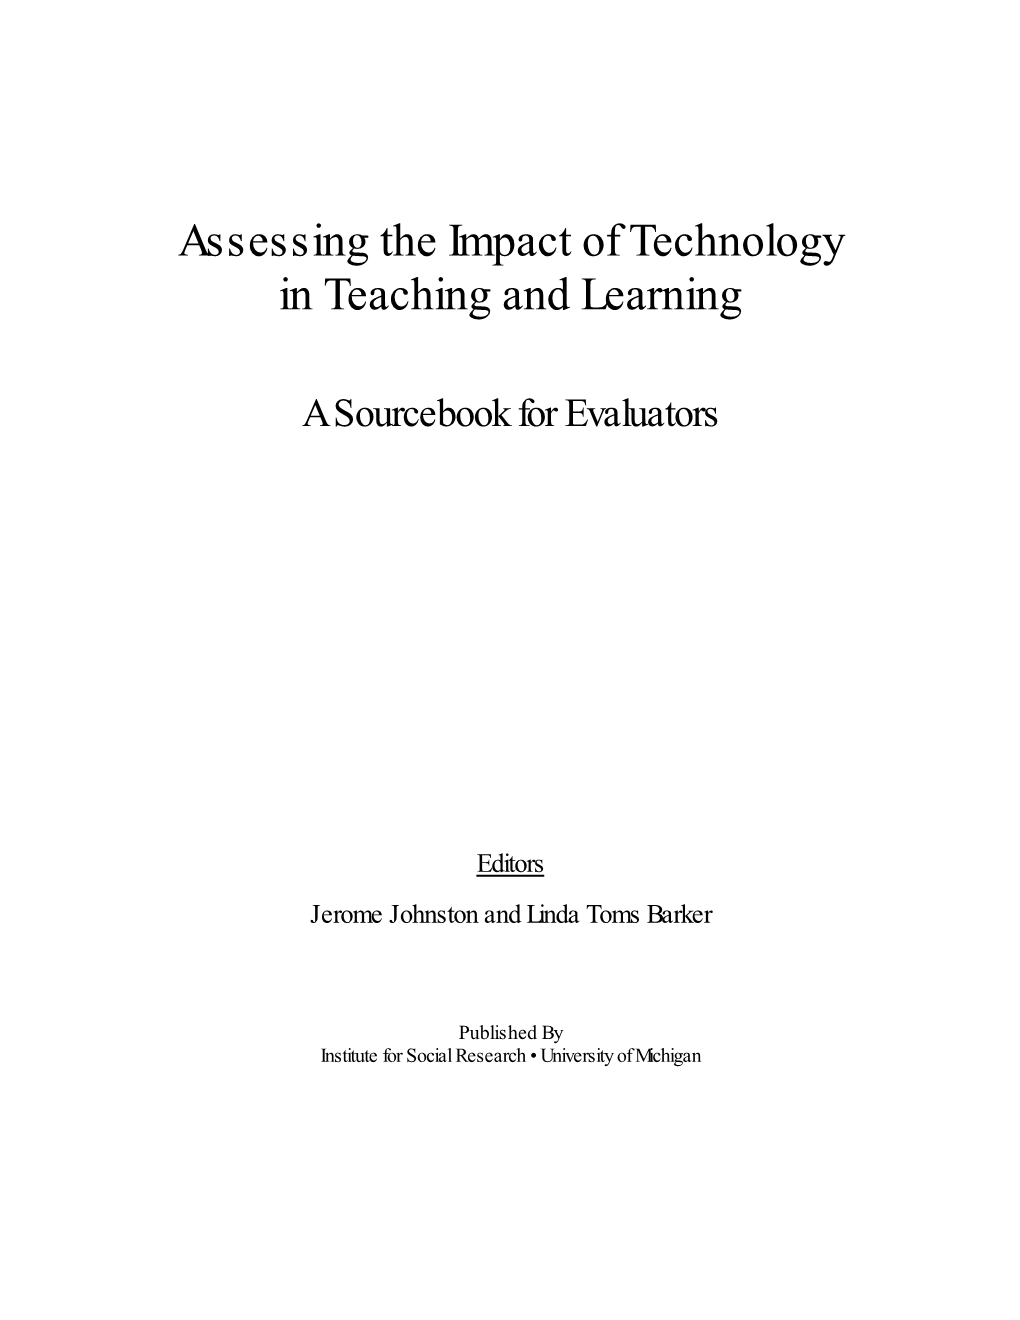 Assessing the Impact of Technology in Teaching and Learning